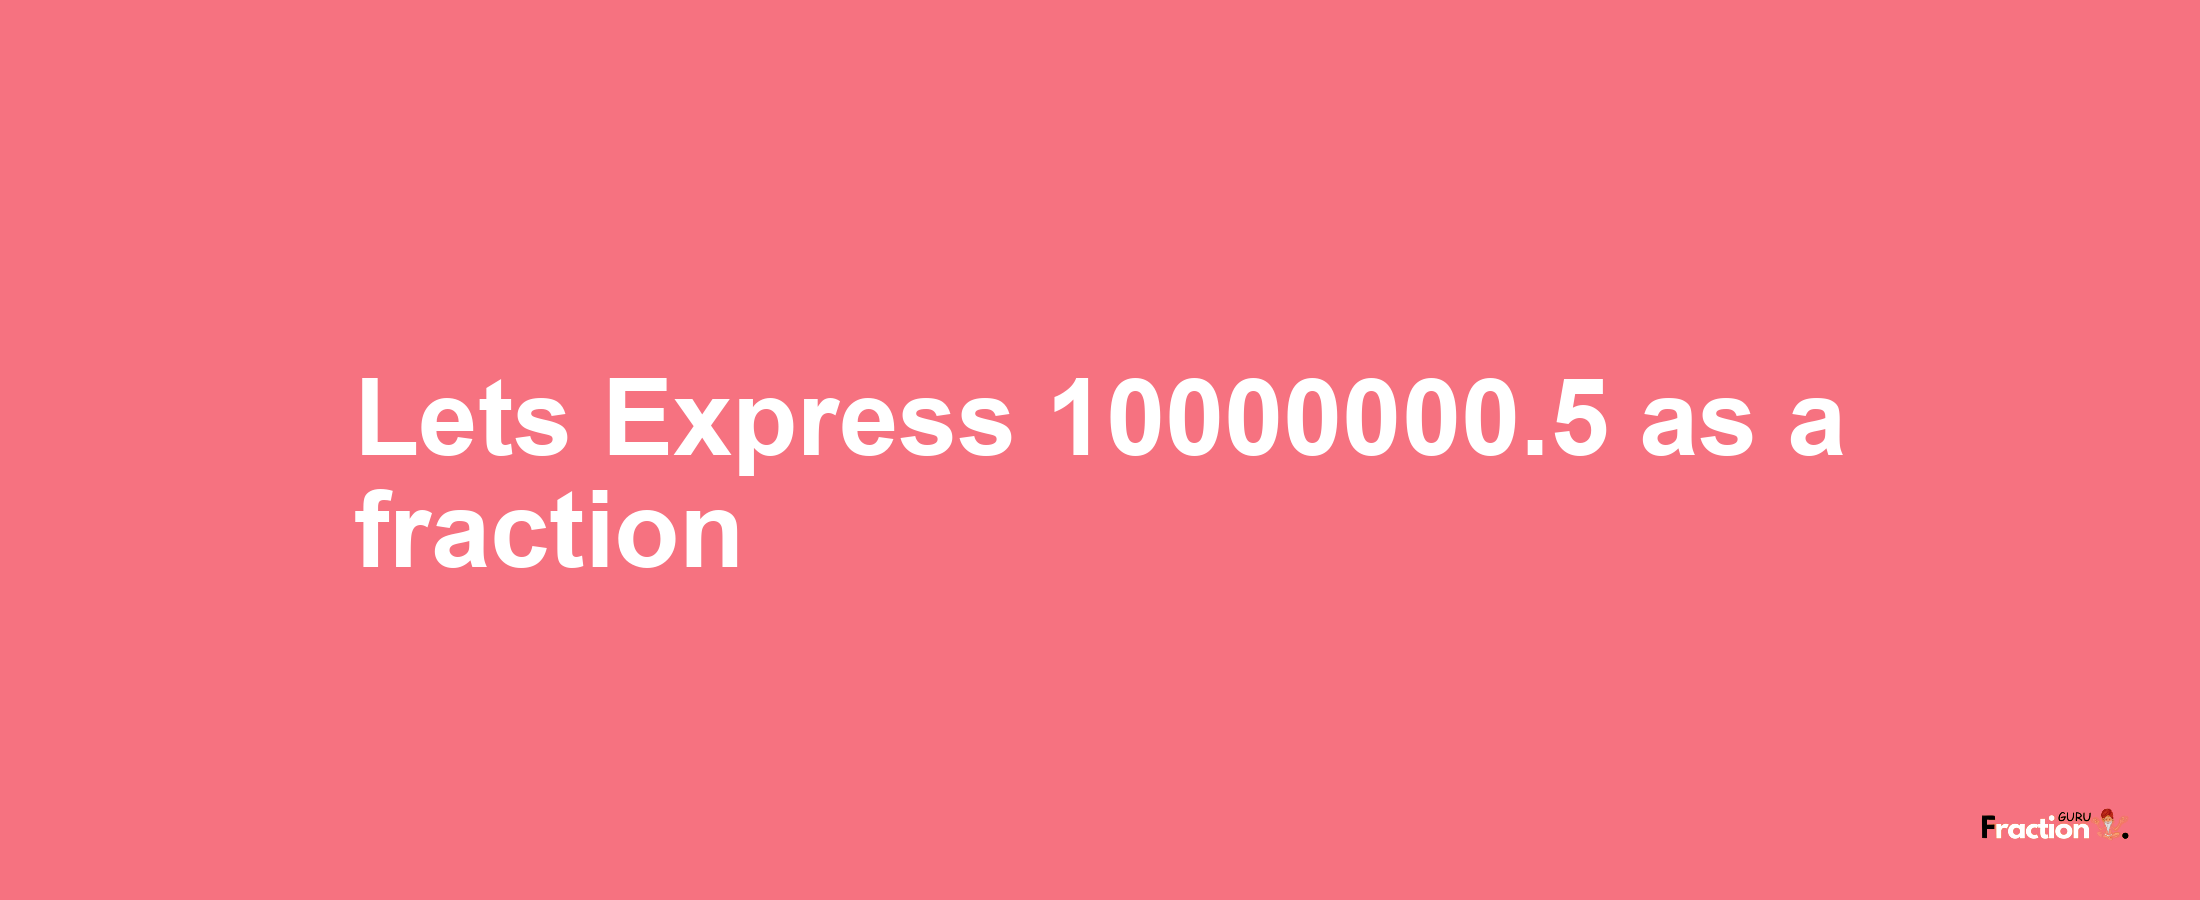 Lets Express 10000000.5 as afraction